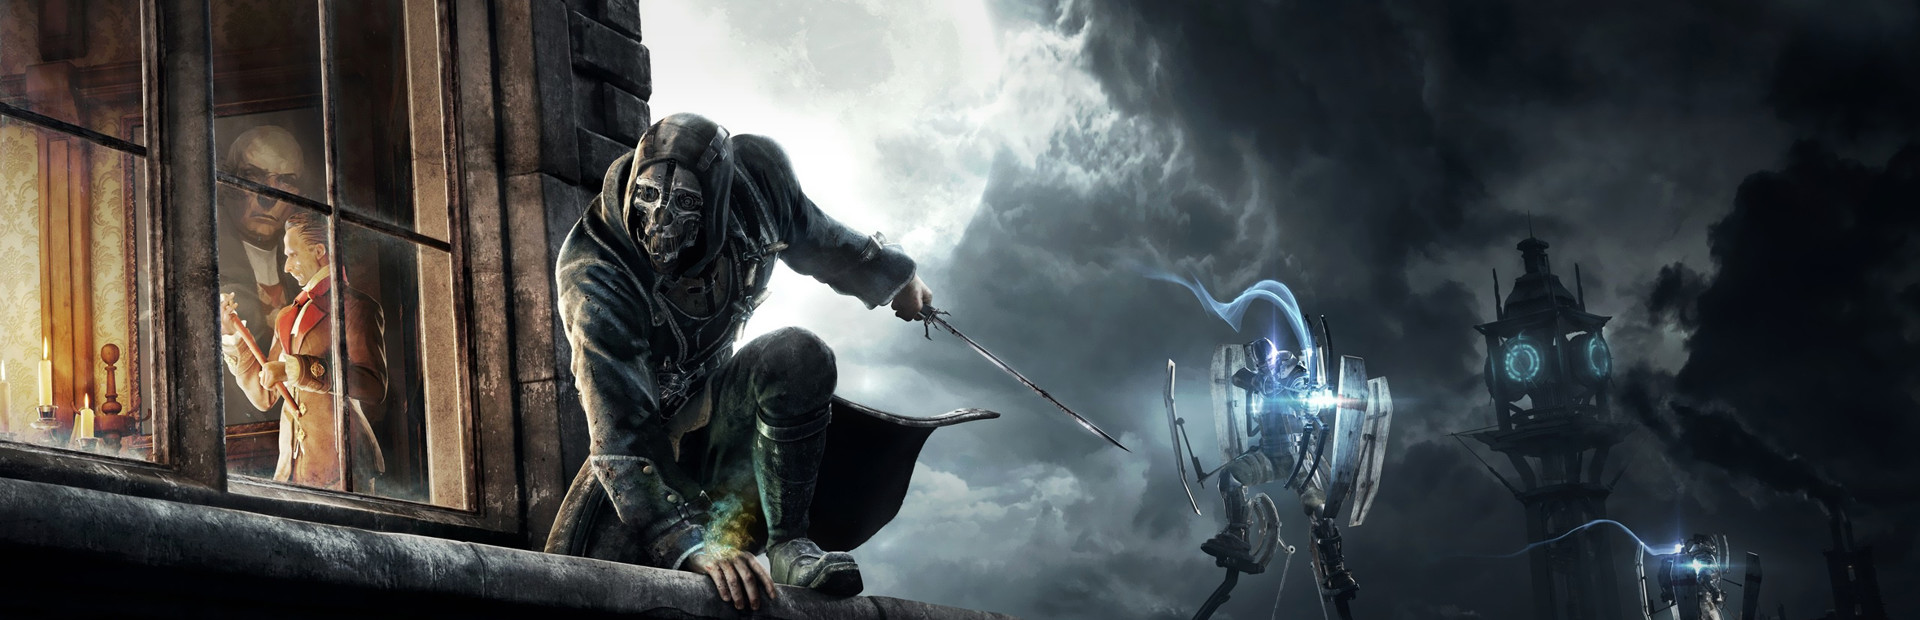 Dishonored cover image